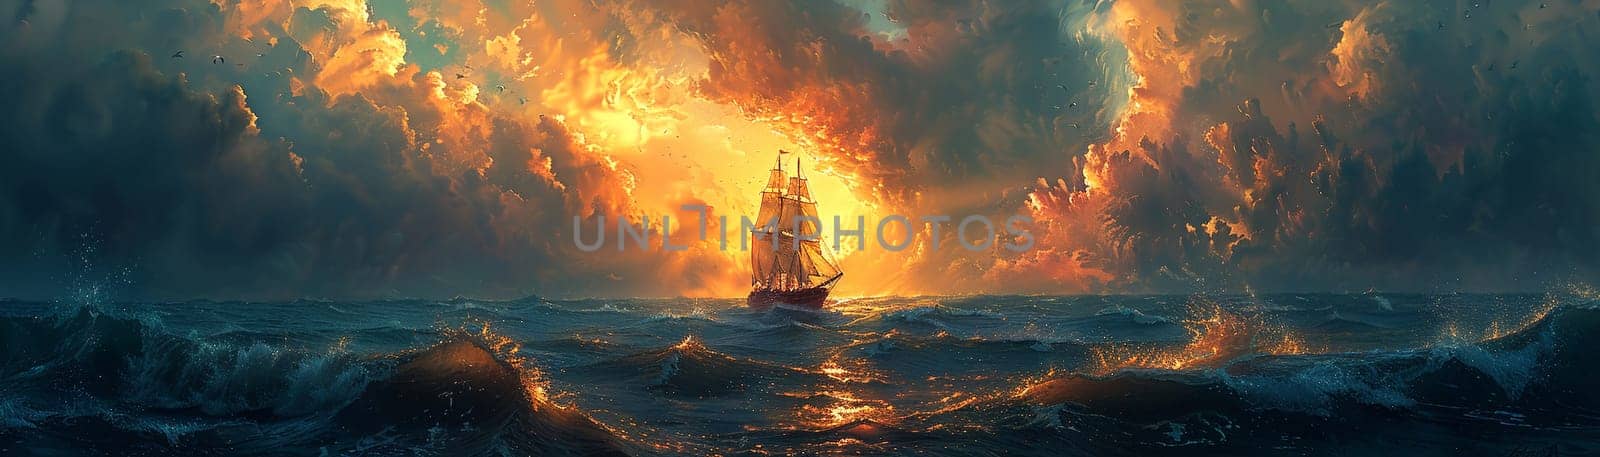 Seafarer adrift in an ocean of dreams, their vessel a craft of hope and horizon.